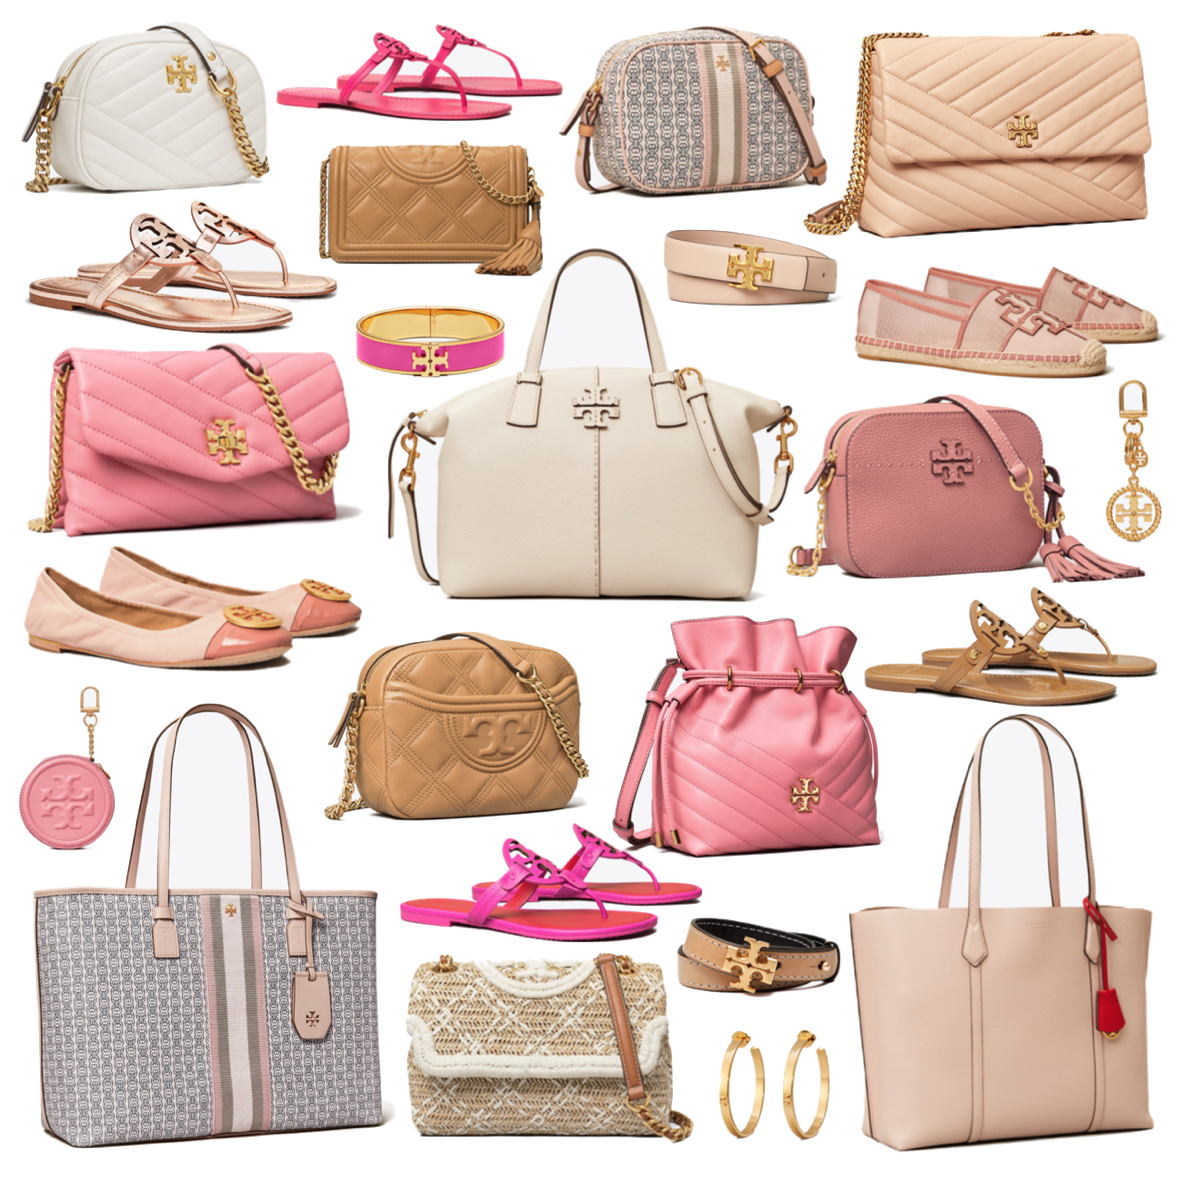 Tory Burch Spring Event | Save Up To 30% Off! - The Double Take Girls